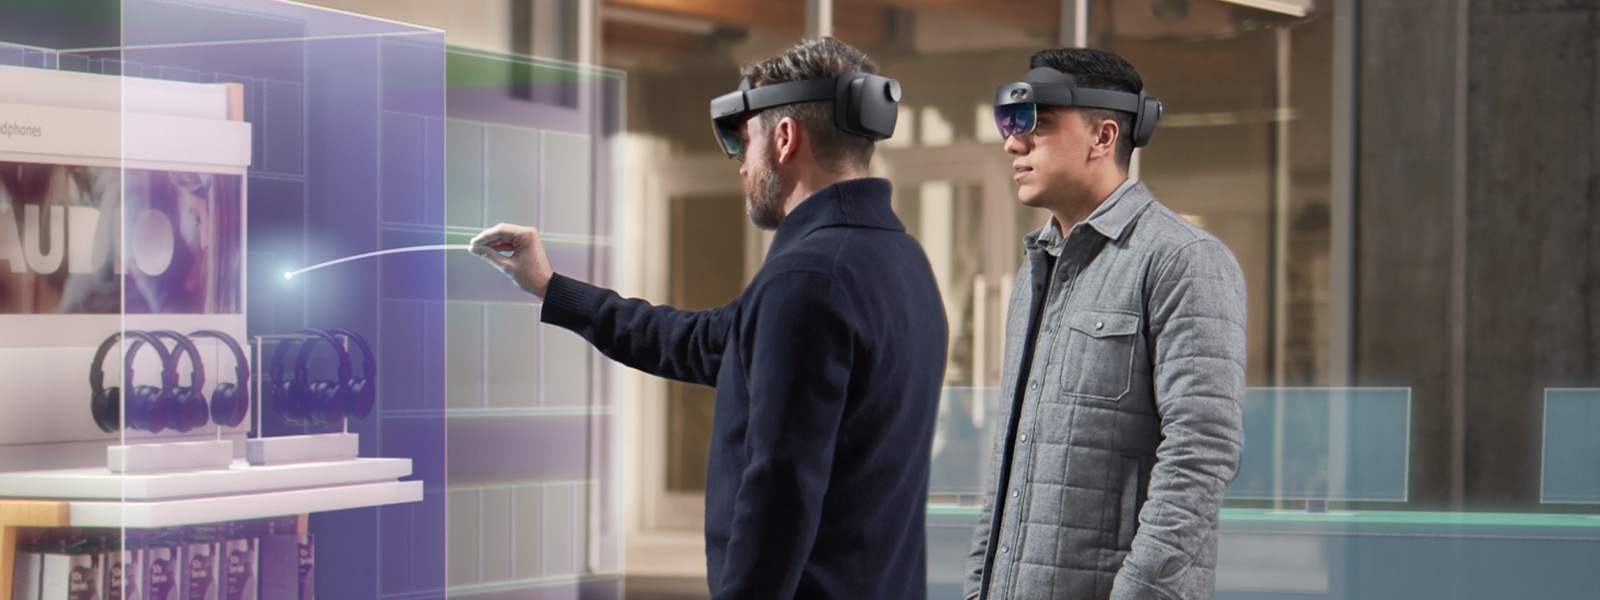 A man uses a HoloLens device to interact with an inventory item, while his coworker looks on.